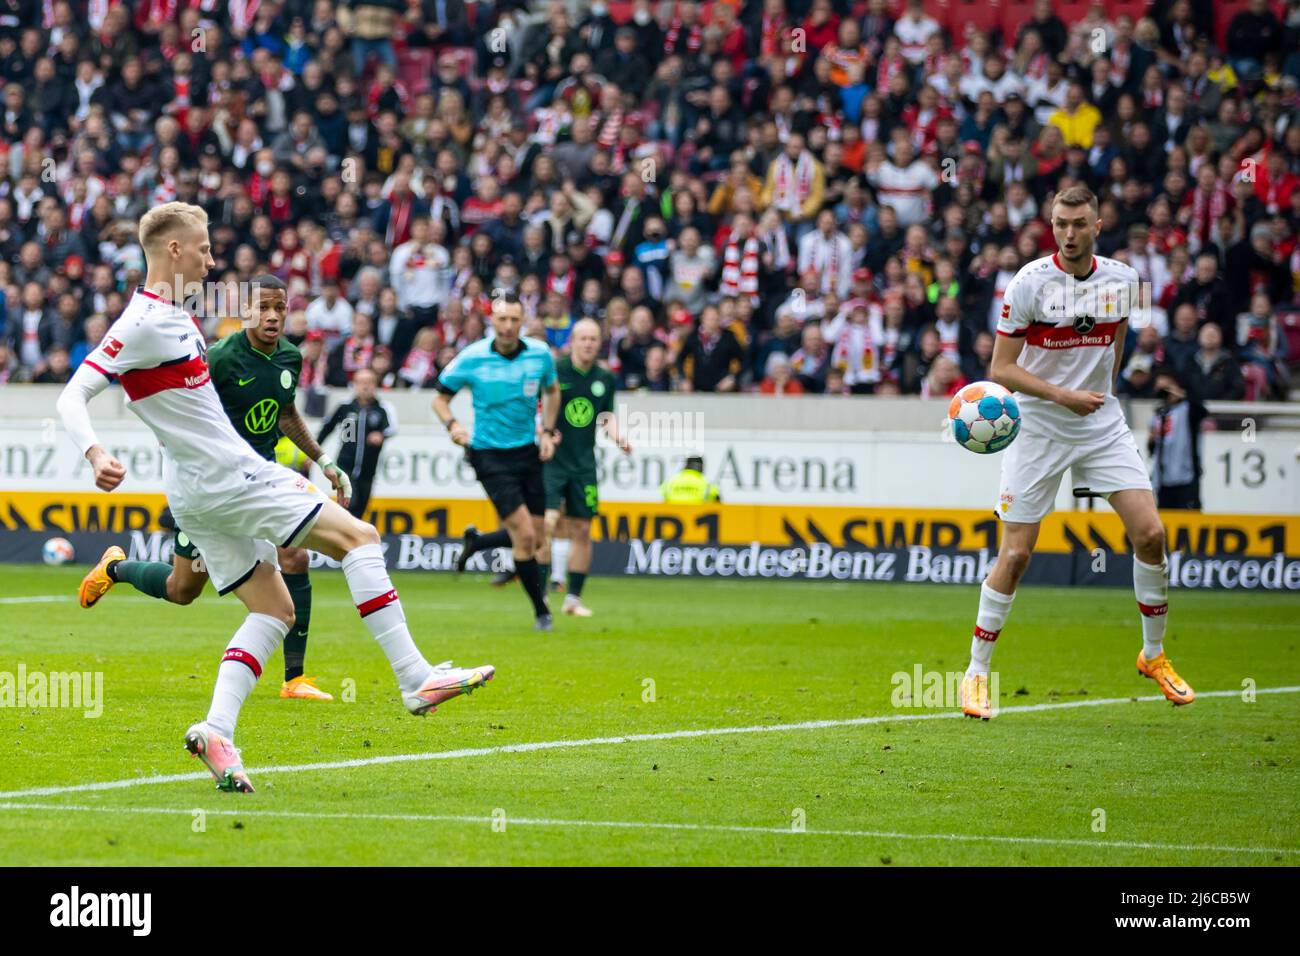 30 April 2022, Baden-Wuerttemberg, Stuttgart: Soccer: Bundesliga, VfB Stuttgart - VfL Wolfsburg, Matchday 32, Mercedes-Benz Arena. Stuttgart's Chris Führich (l) scores the goal to make it 1:1. Photo: Tom Weller/dpa - IMPORTANT NOTE: In accordance with the requirements of the DFL Deutsche Fußball Liga and the DFB Deutscher Fußball-Bund, it is prohibited to use or have used photographs taken in the stadium and/or of the match in the form of sequence pictures and/or video-like photo series. Stock Photo